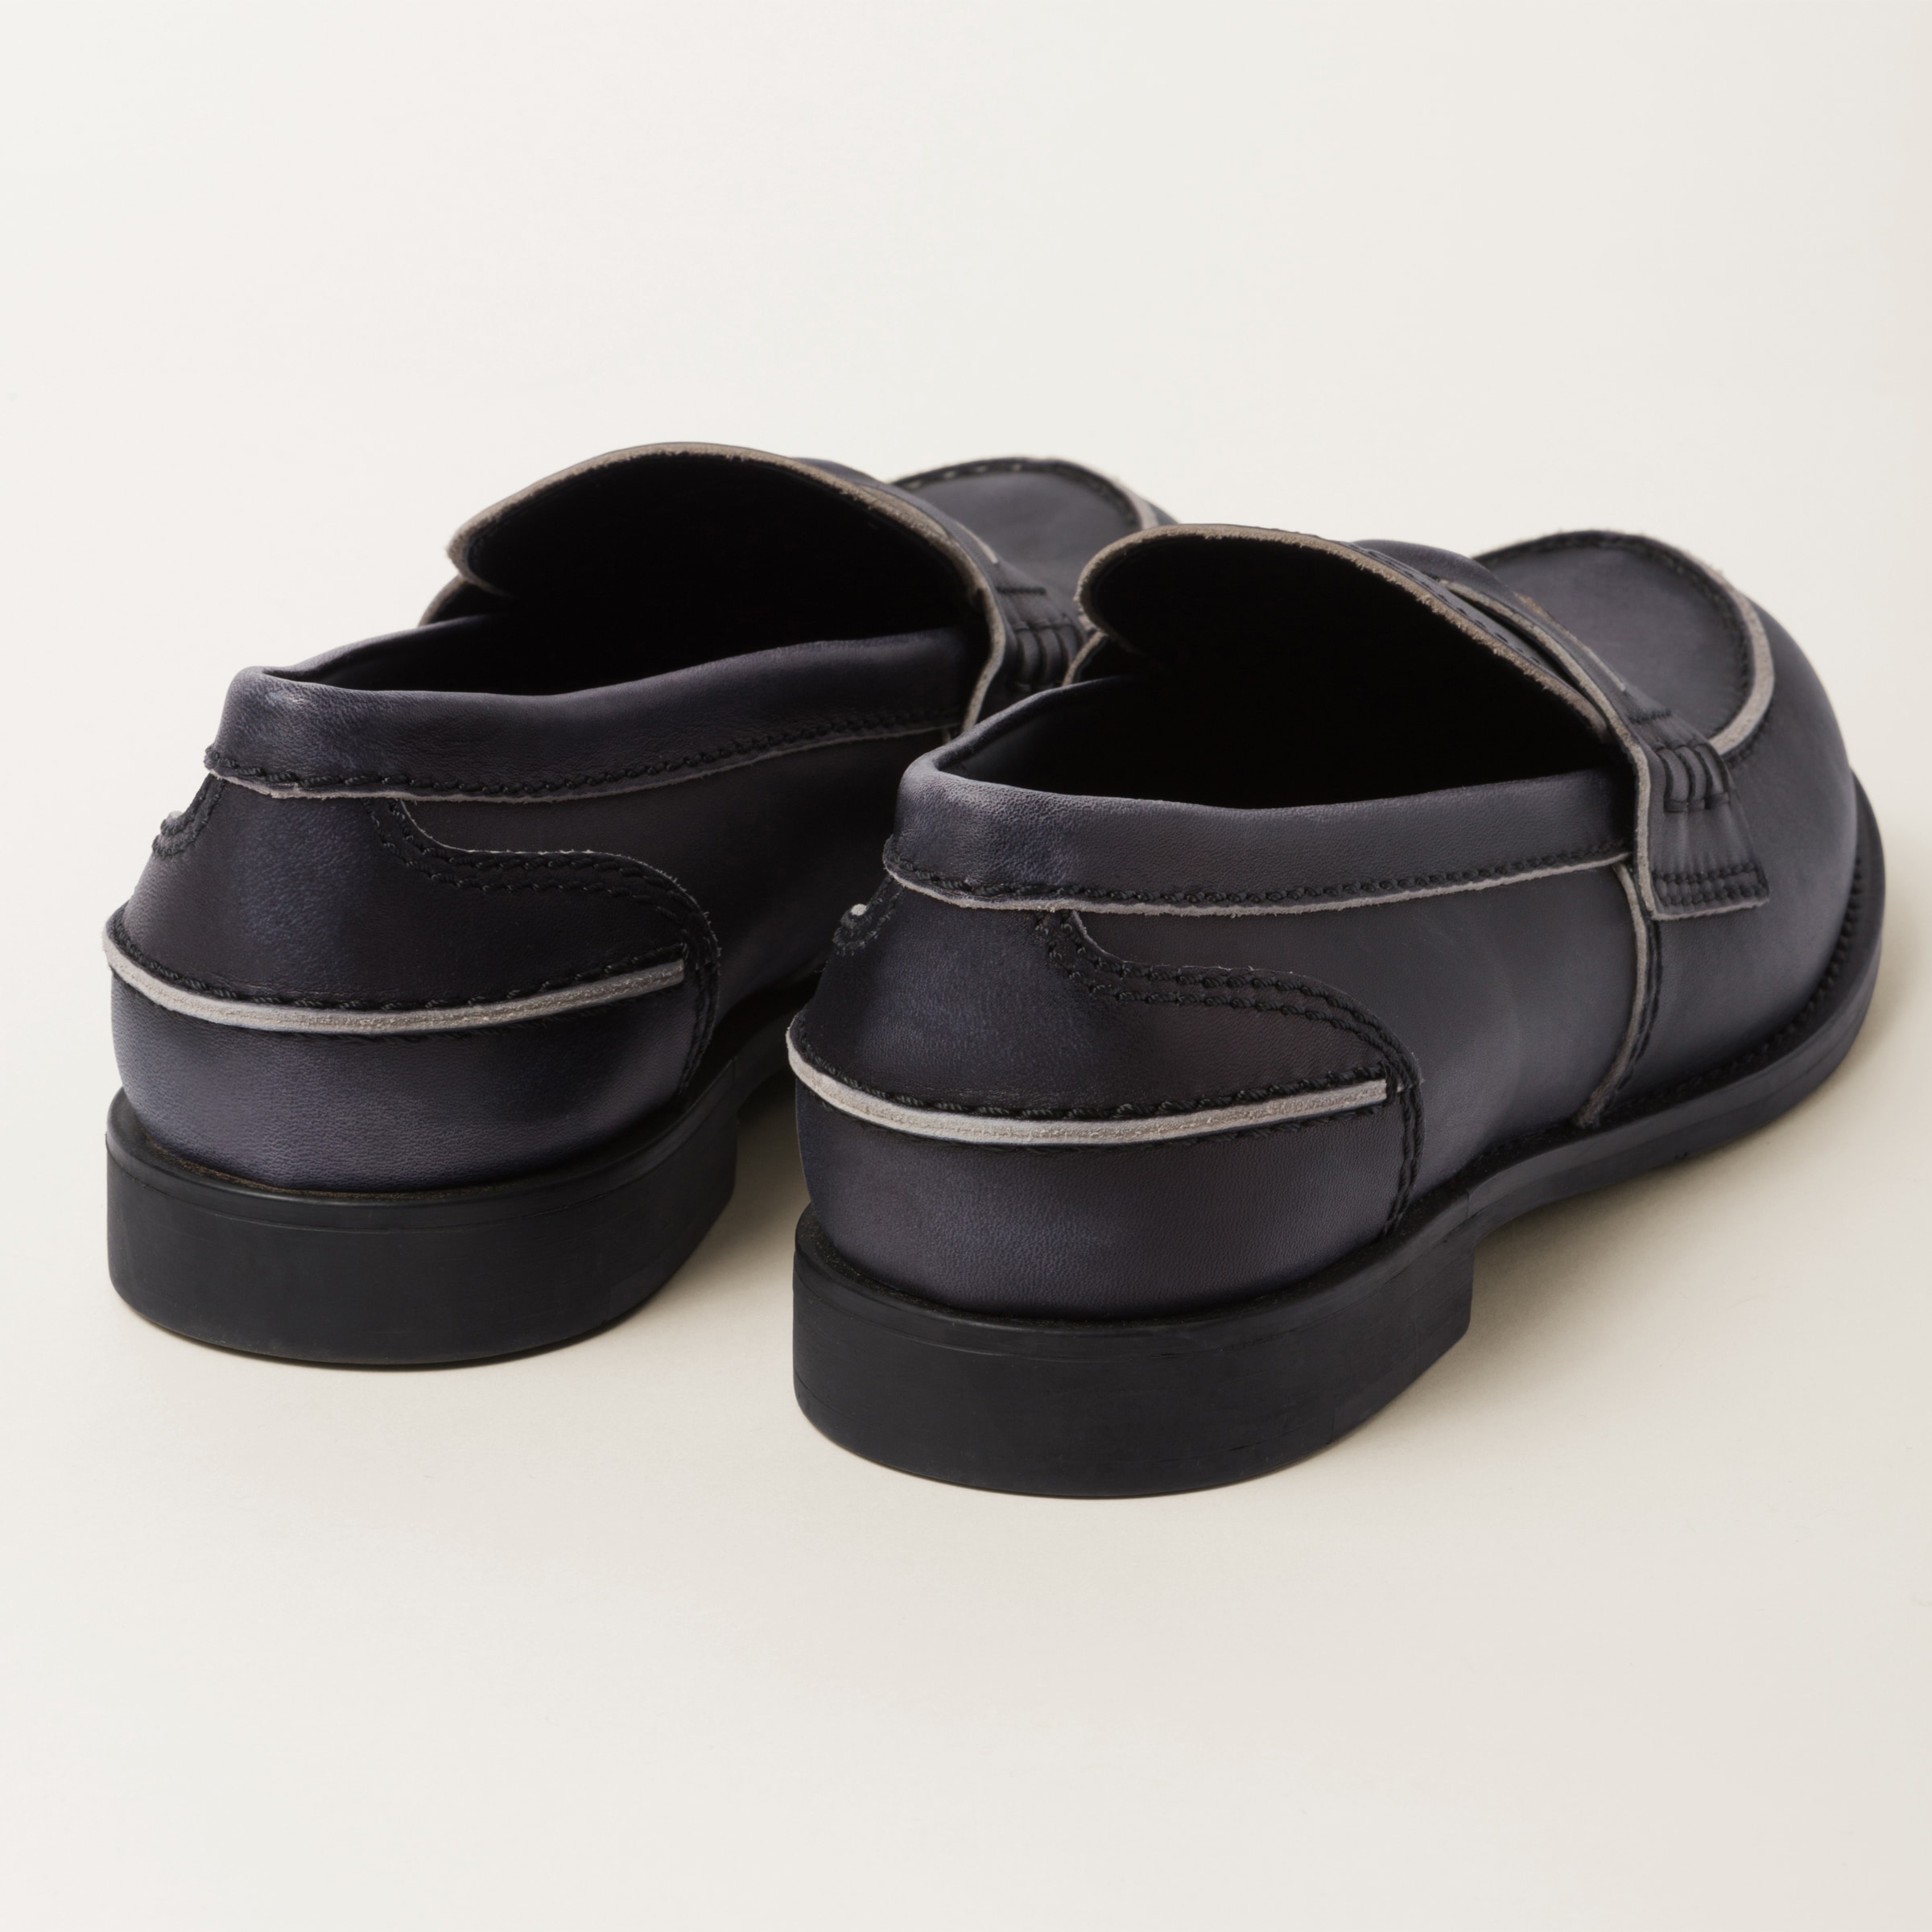 Vintage-effect leather loafers - 2